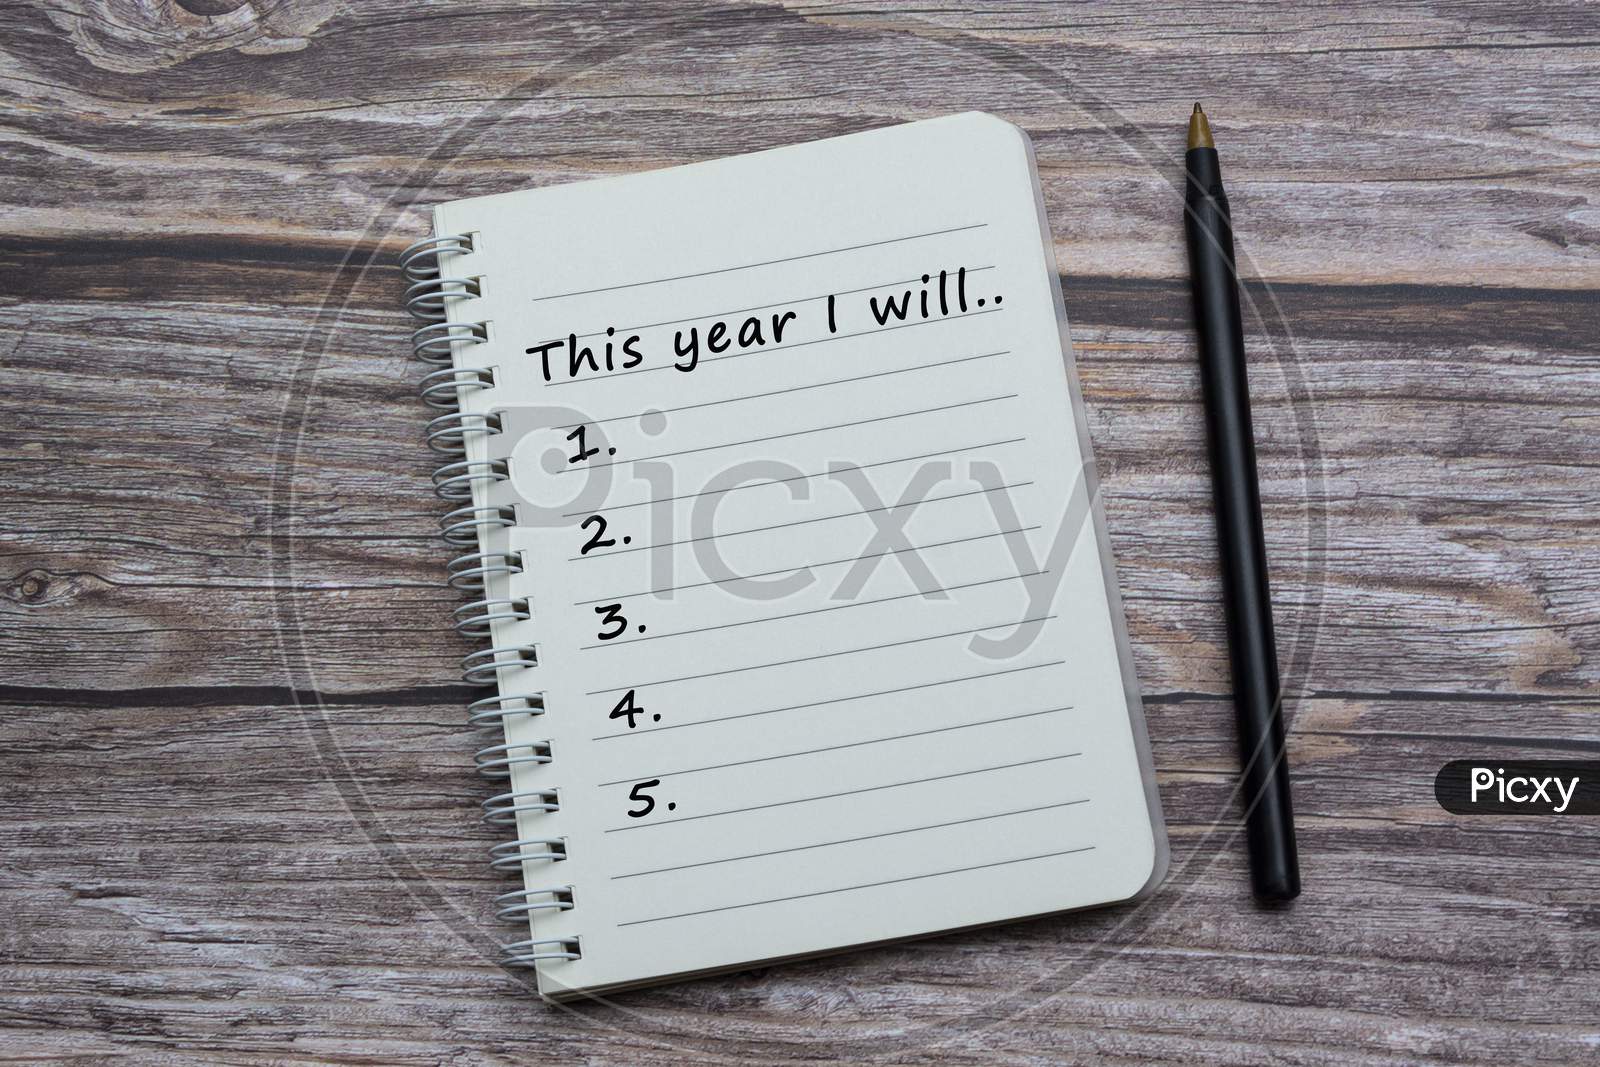 Text On Notebook With Pen On Wooden Desk - This Year I Will